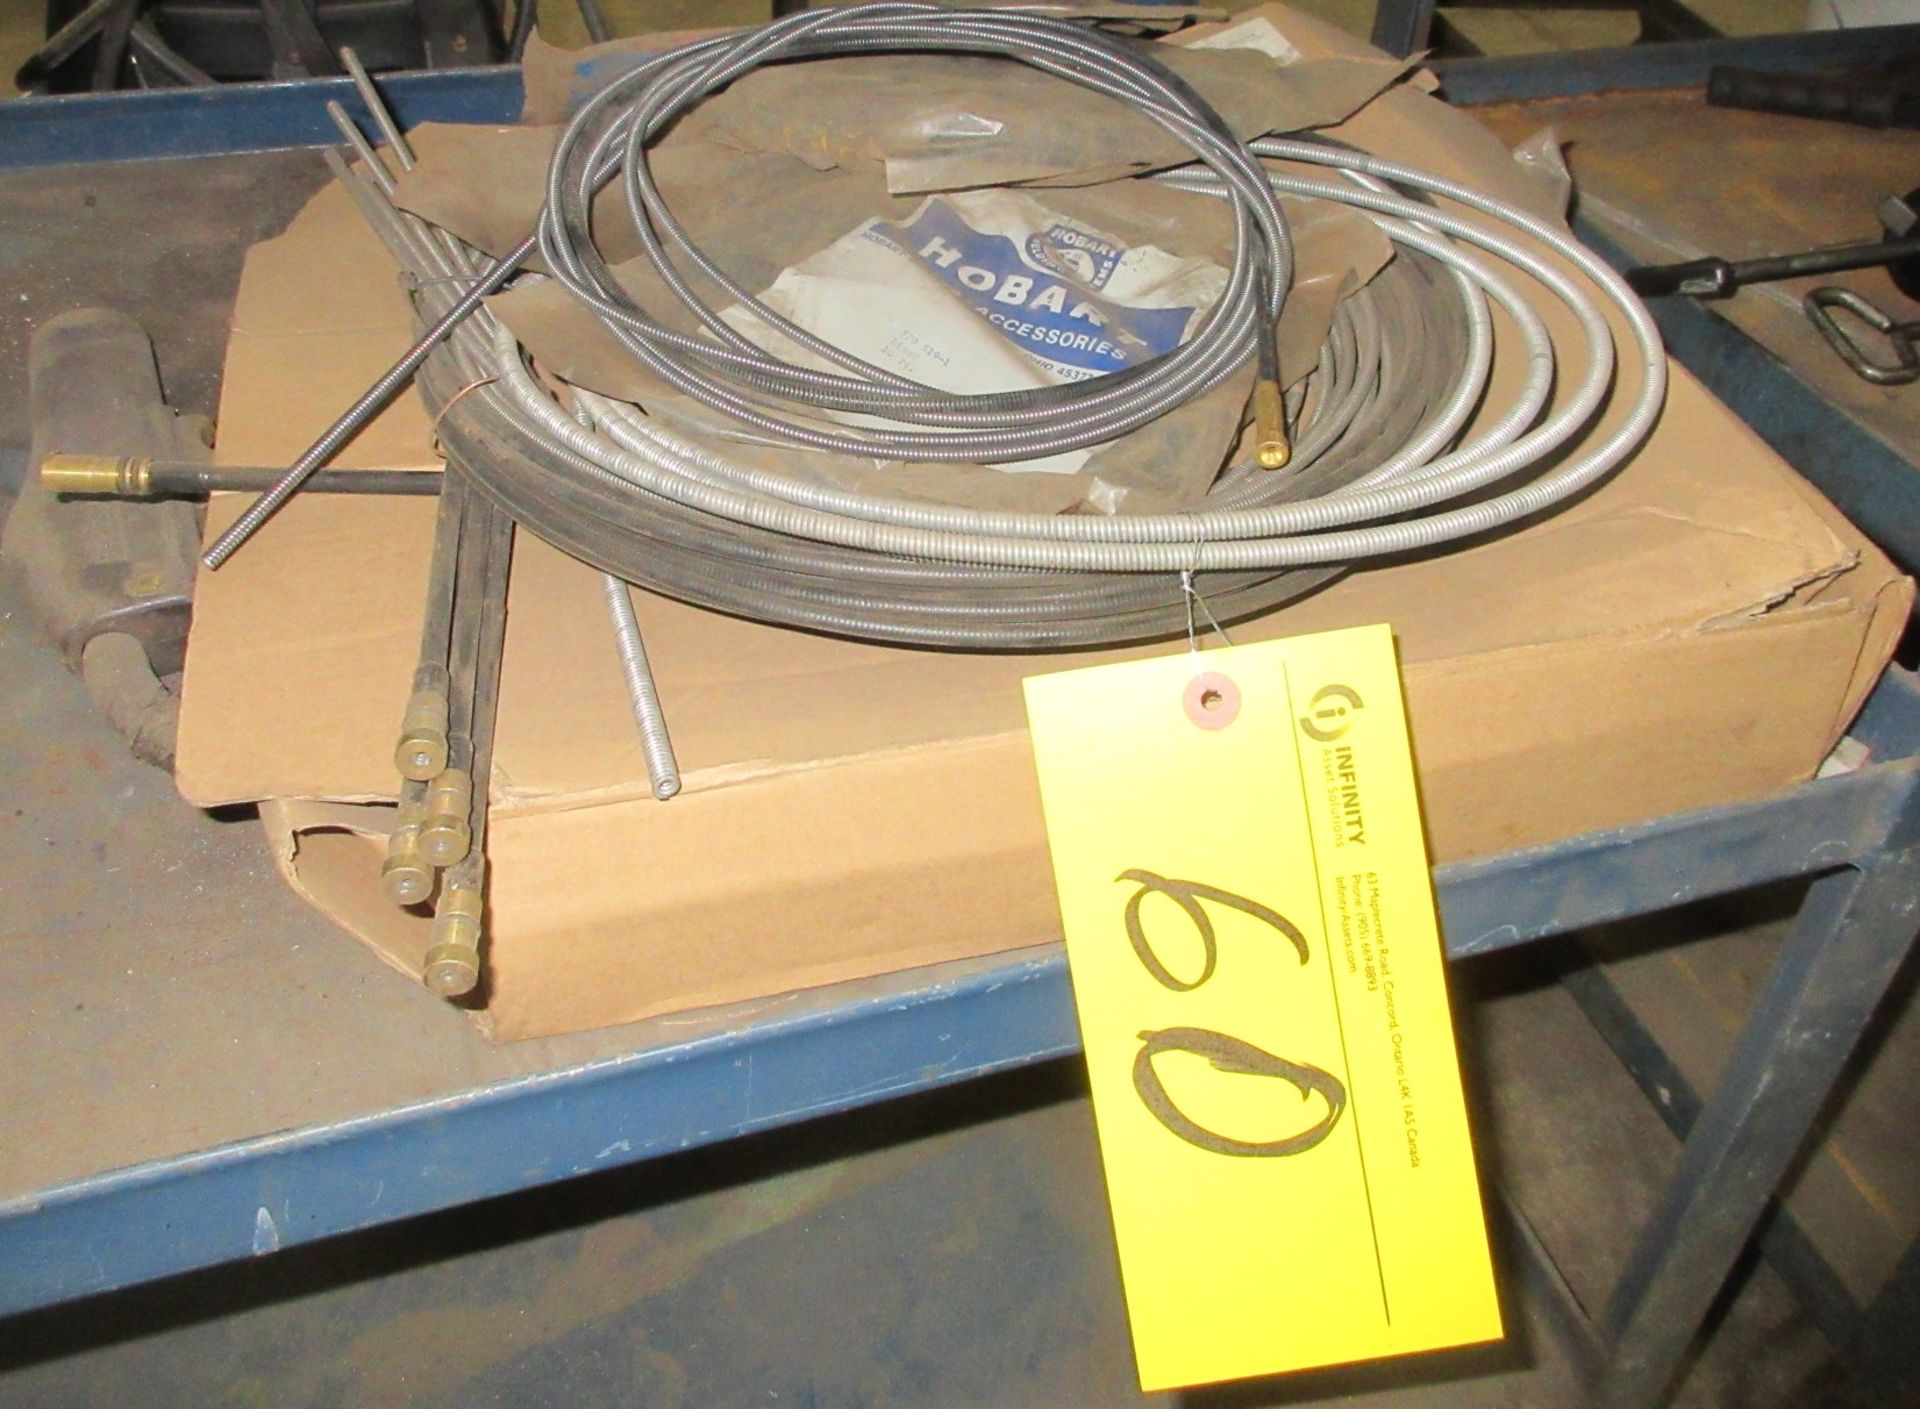 LOT OF WELDING SUPPLIES ON CART INCLUDING TUNCOWELD ELECTRODES, CABLES, TIPS, PARTS, ETC. - Image 8 of 9